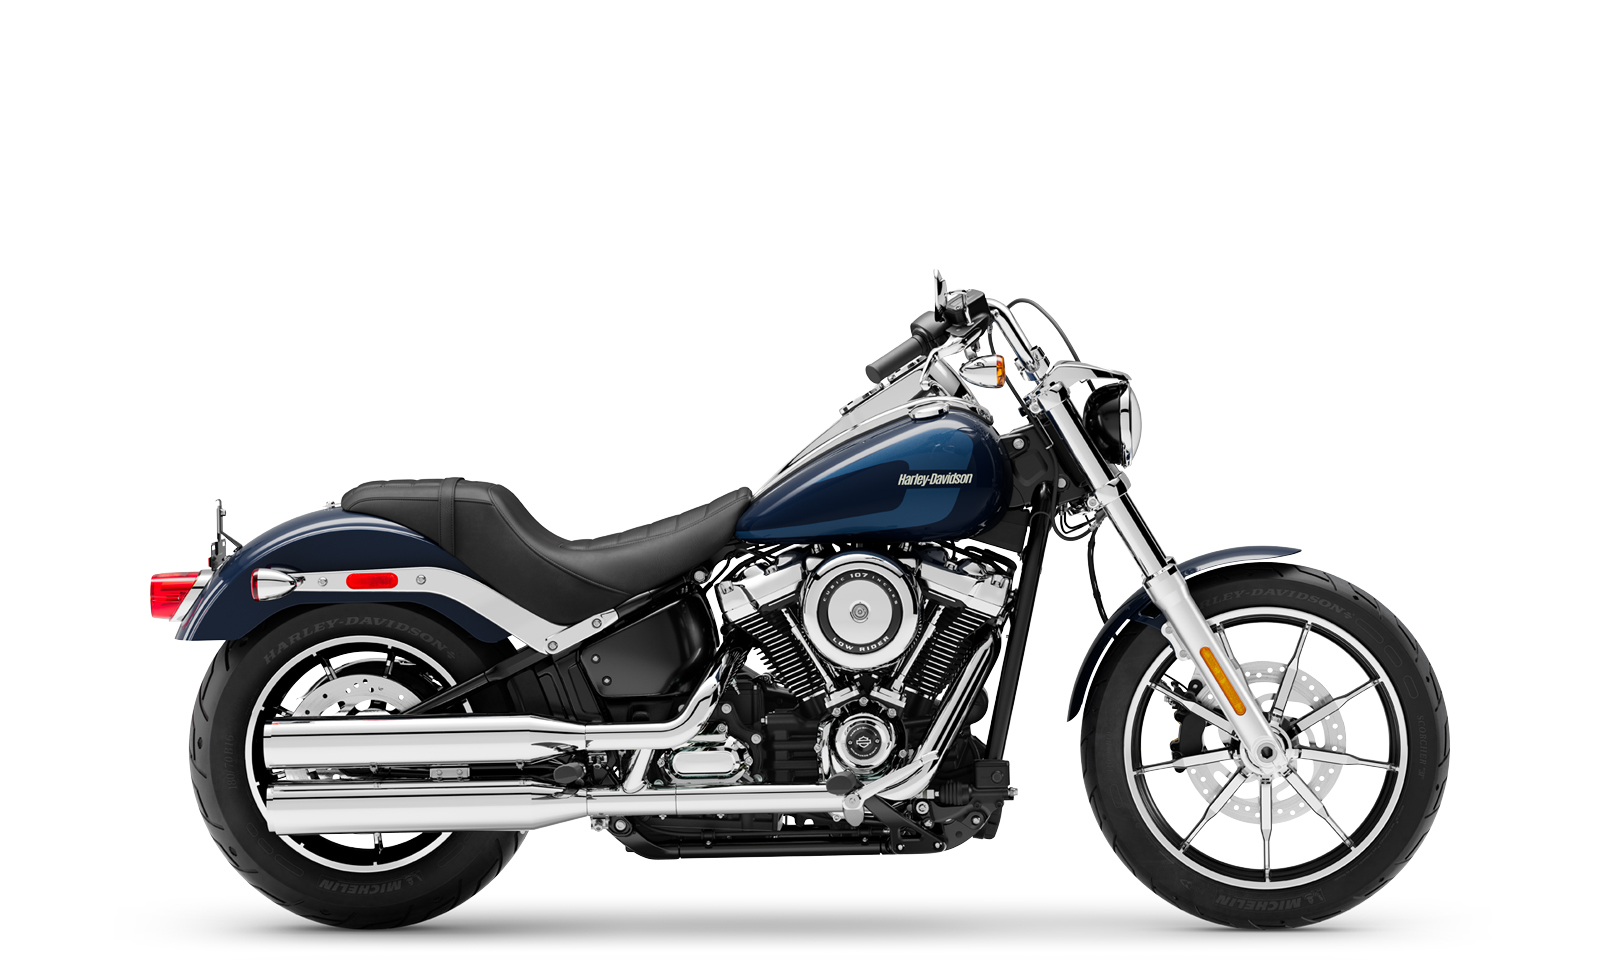 2020 Low Rider Motorcycle Harley Davidson Asia Pacific Markets